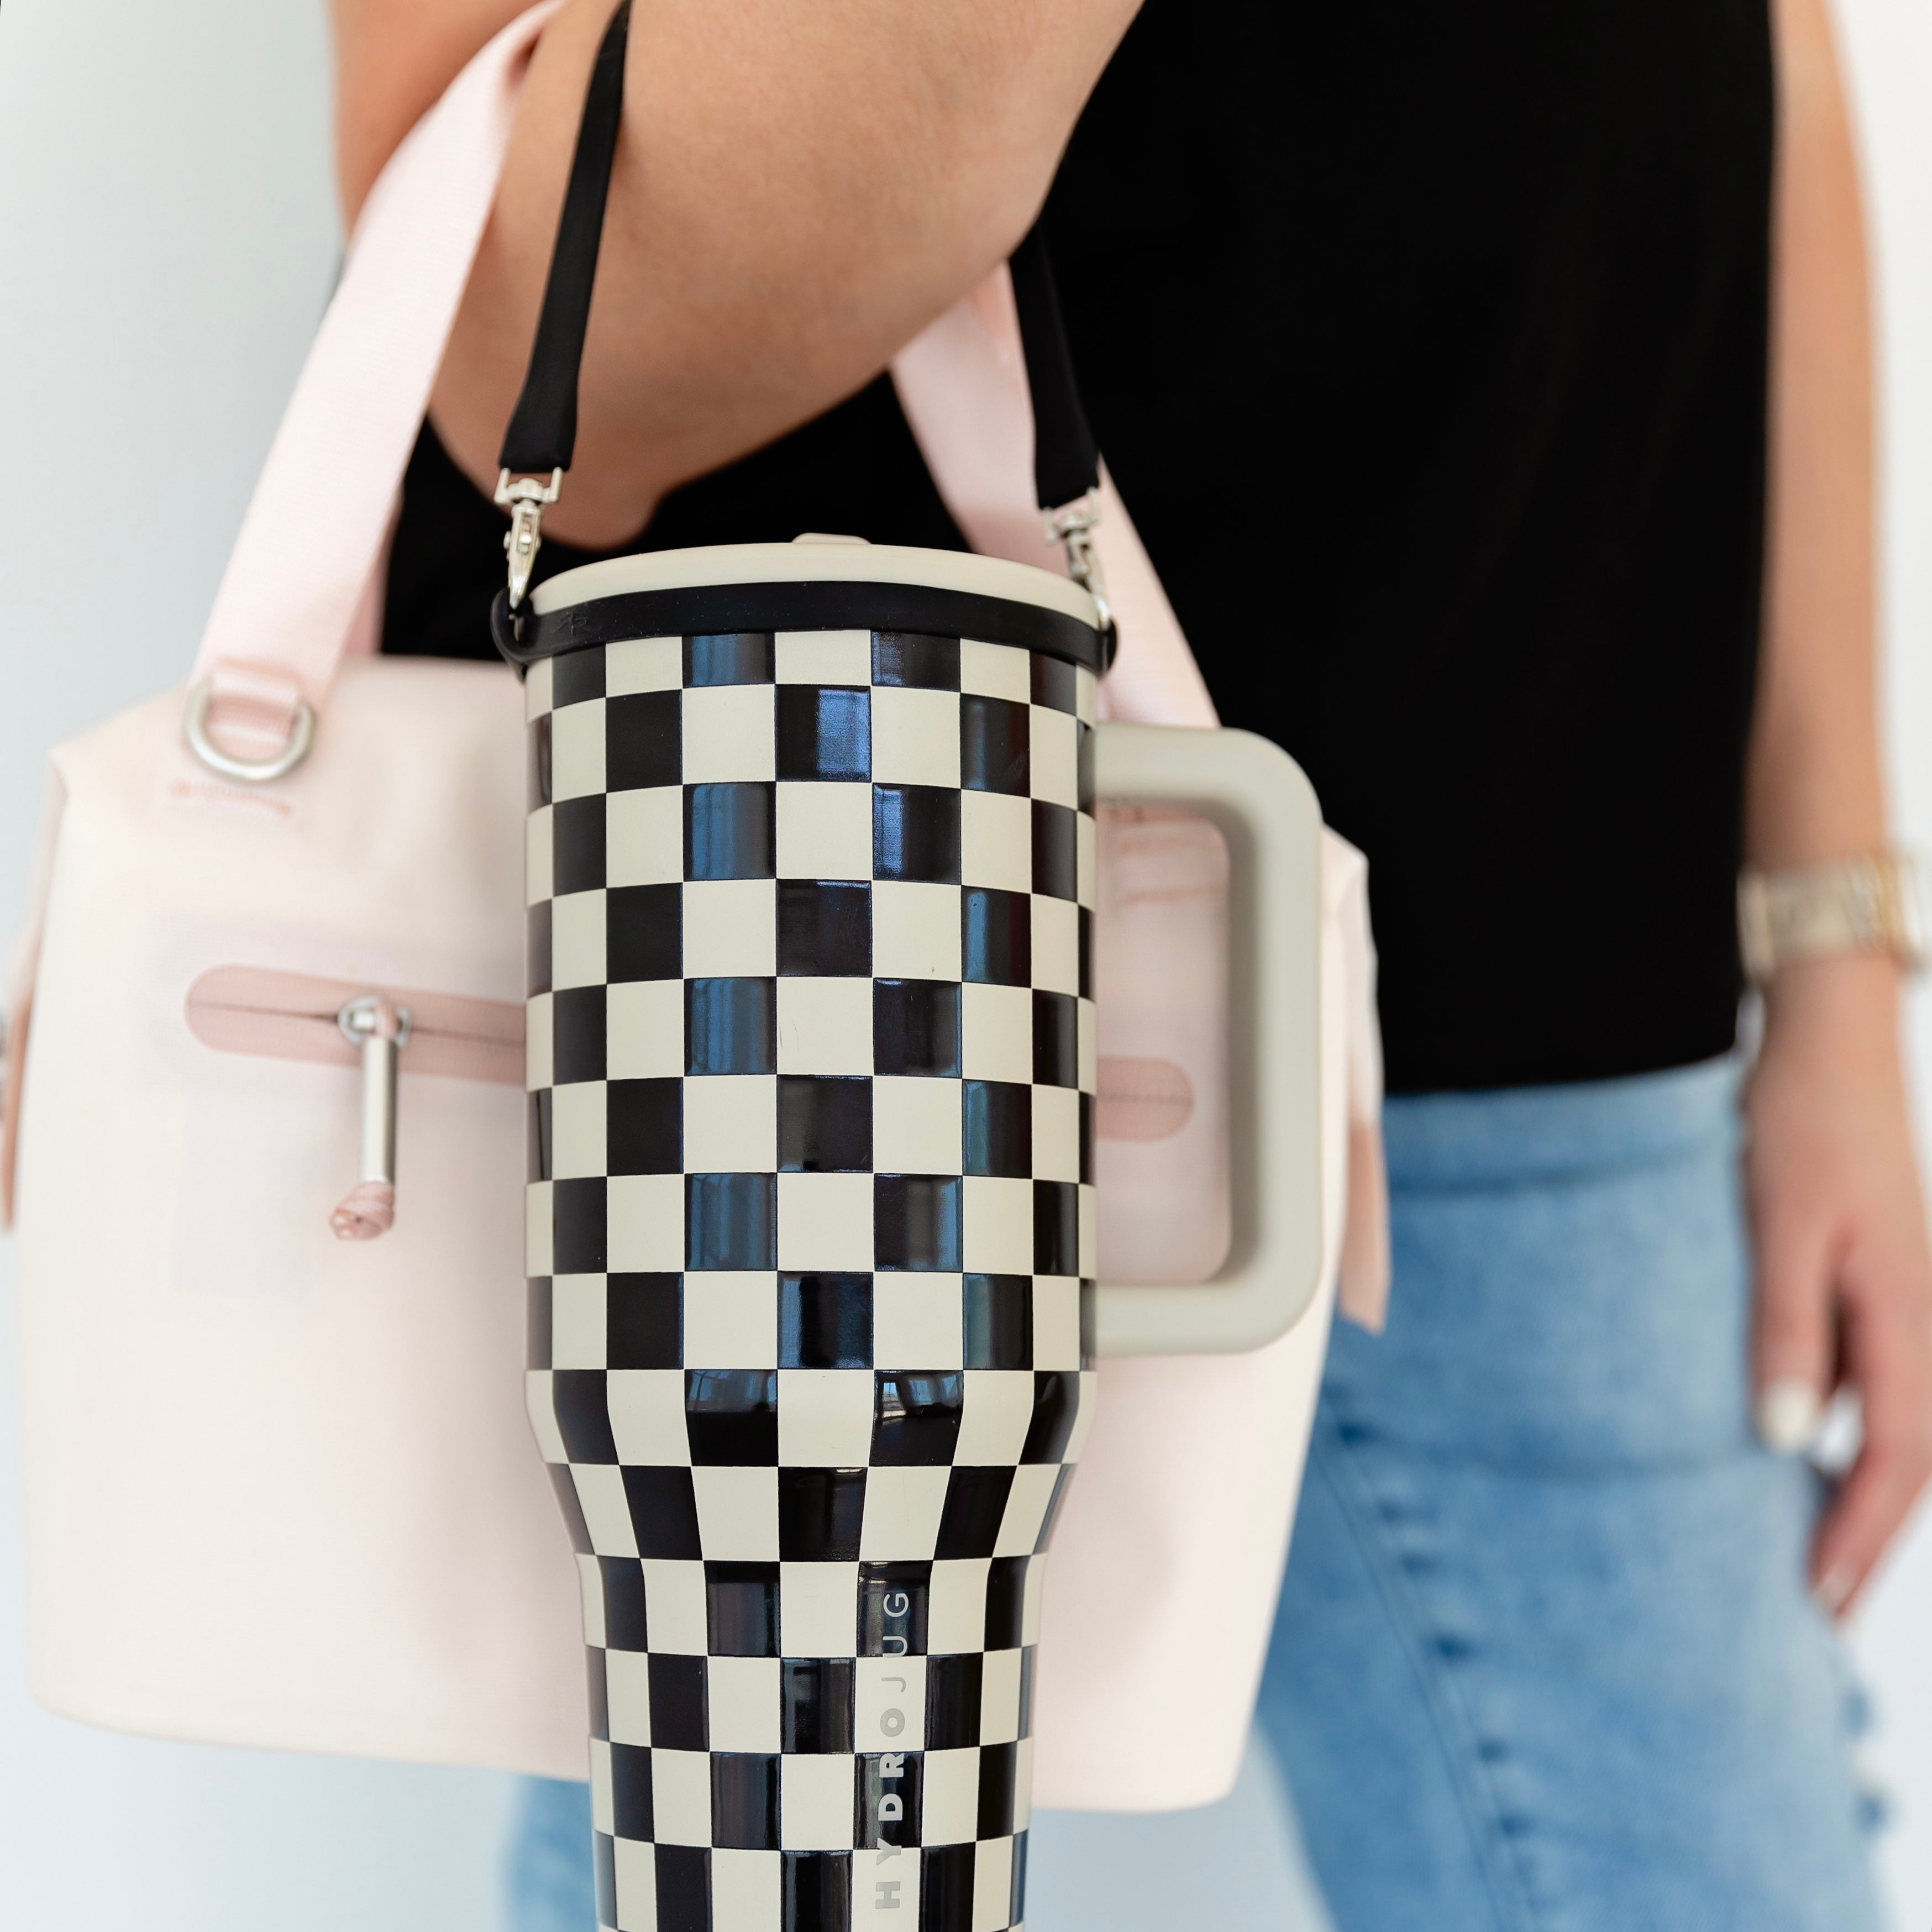 Woman holding purse and water bottle